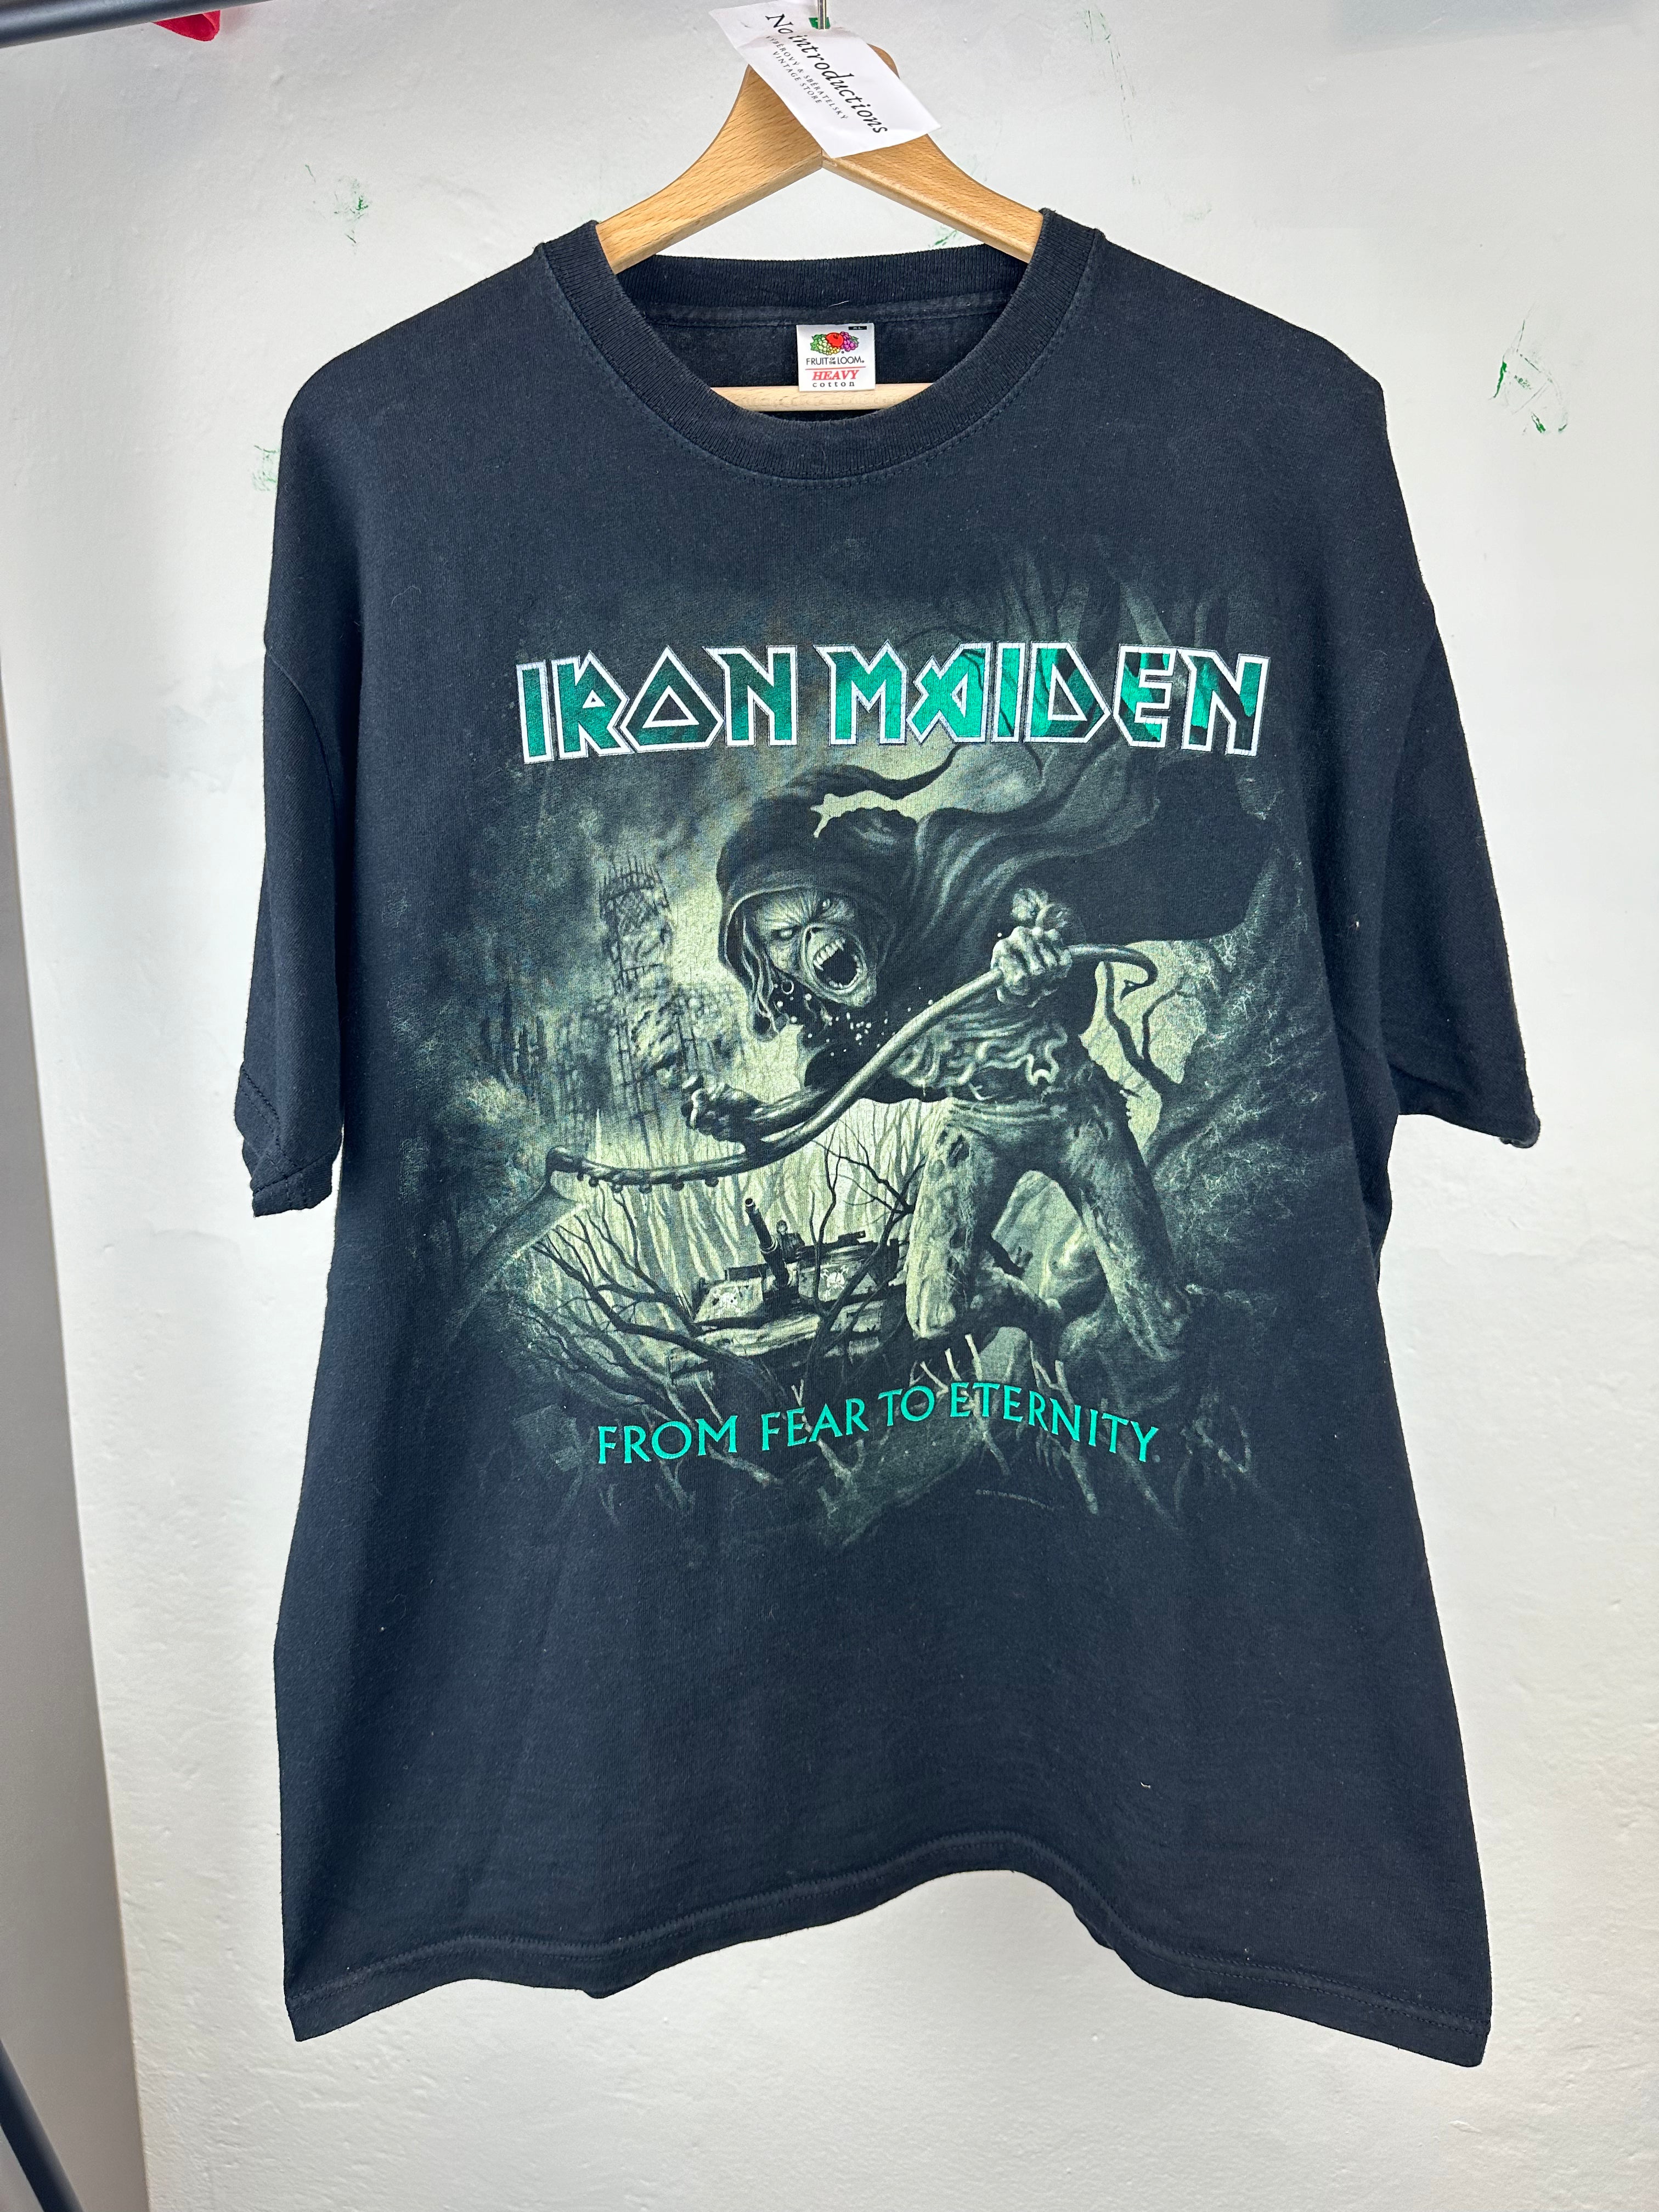 Vintage Iron Maiden "From Fear to Eternity" T-shirt - size XL